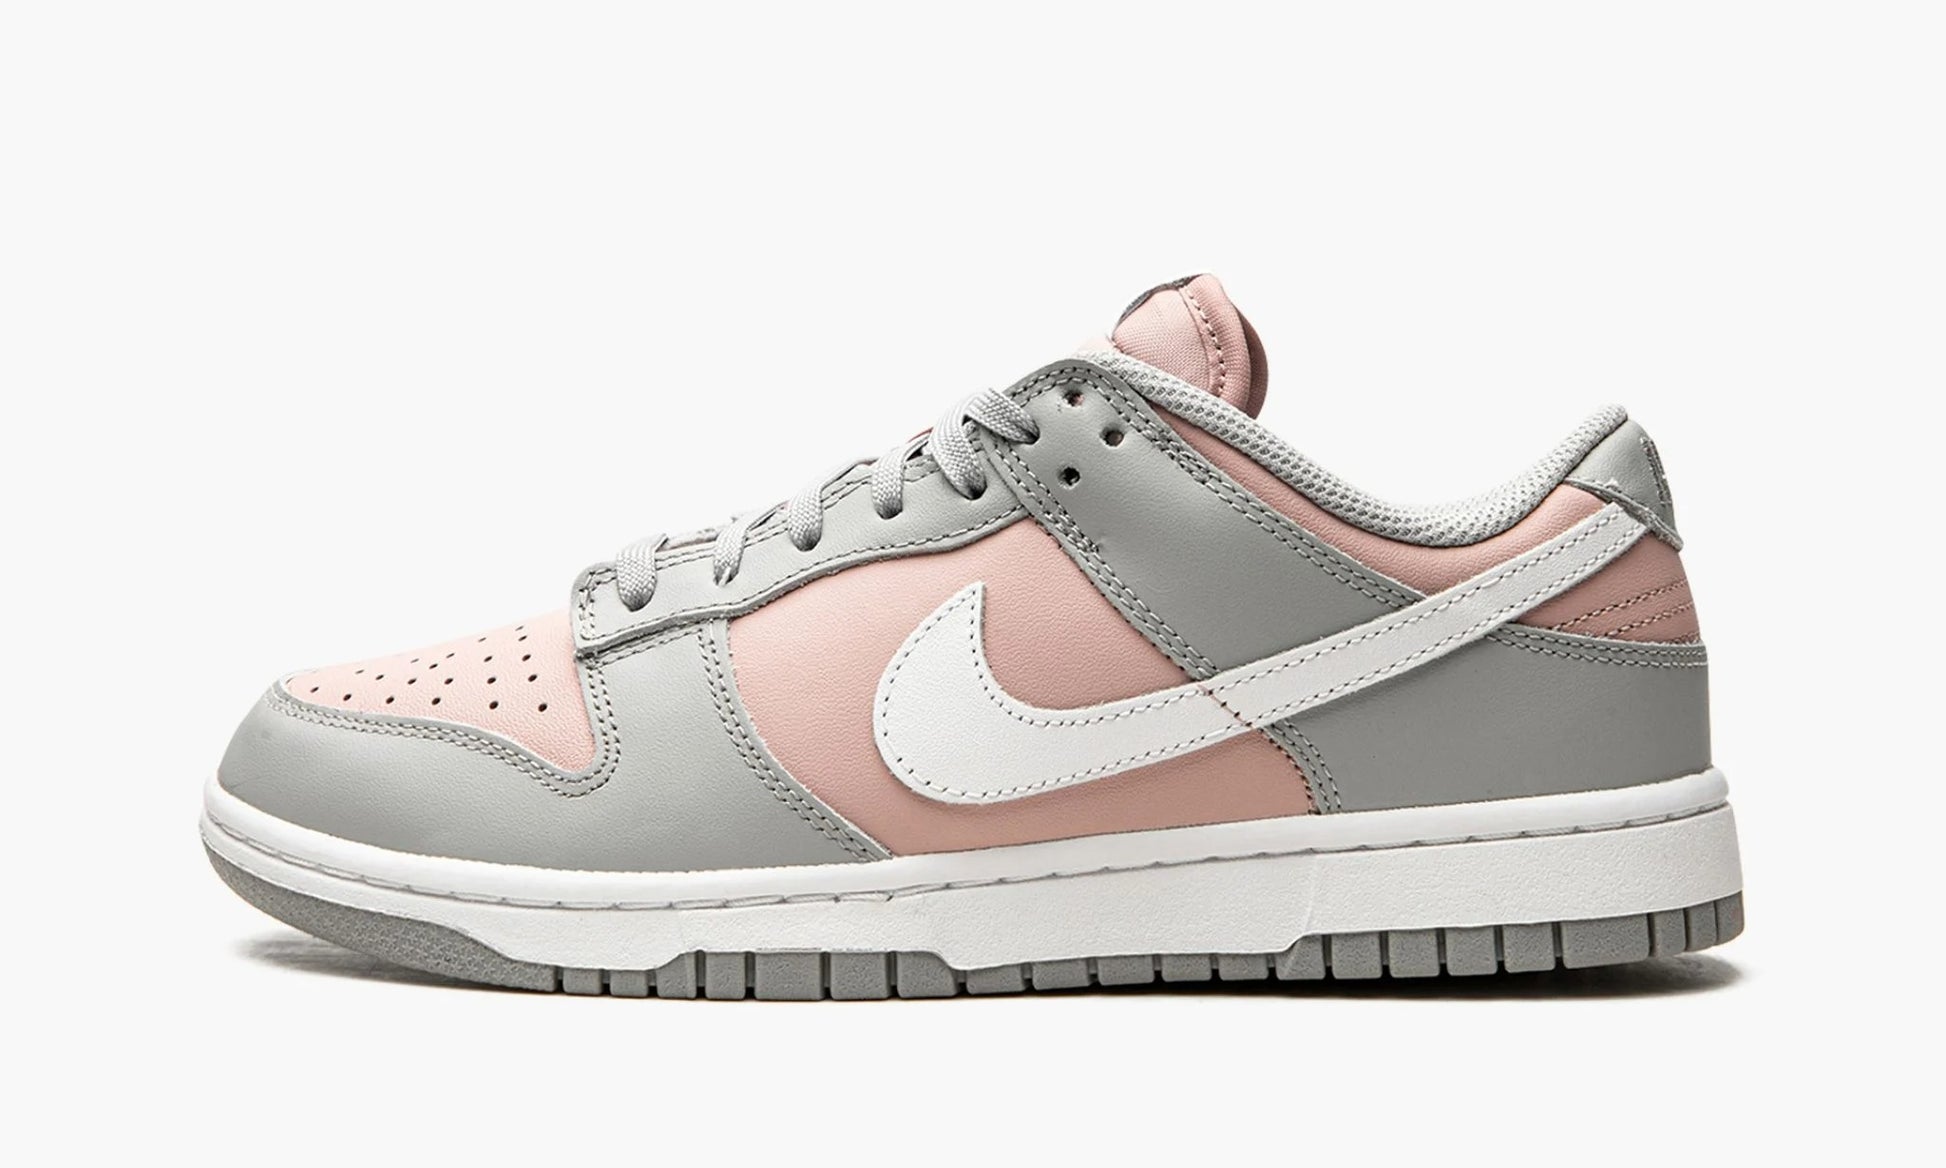 Dunk Low WMNS Pink Oxford - DM8329 600 | The Sortage